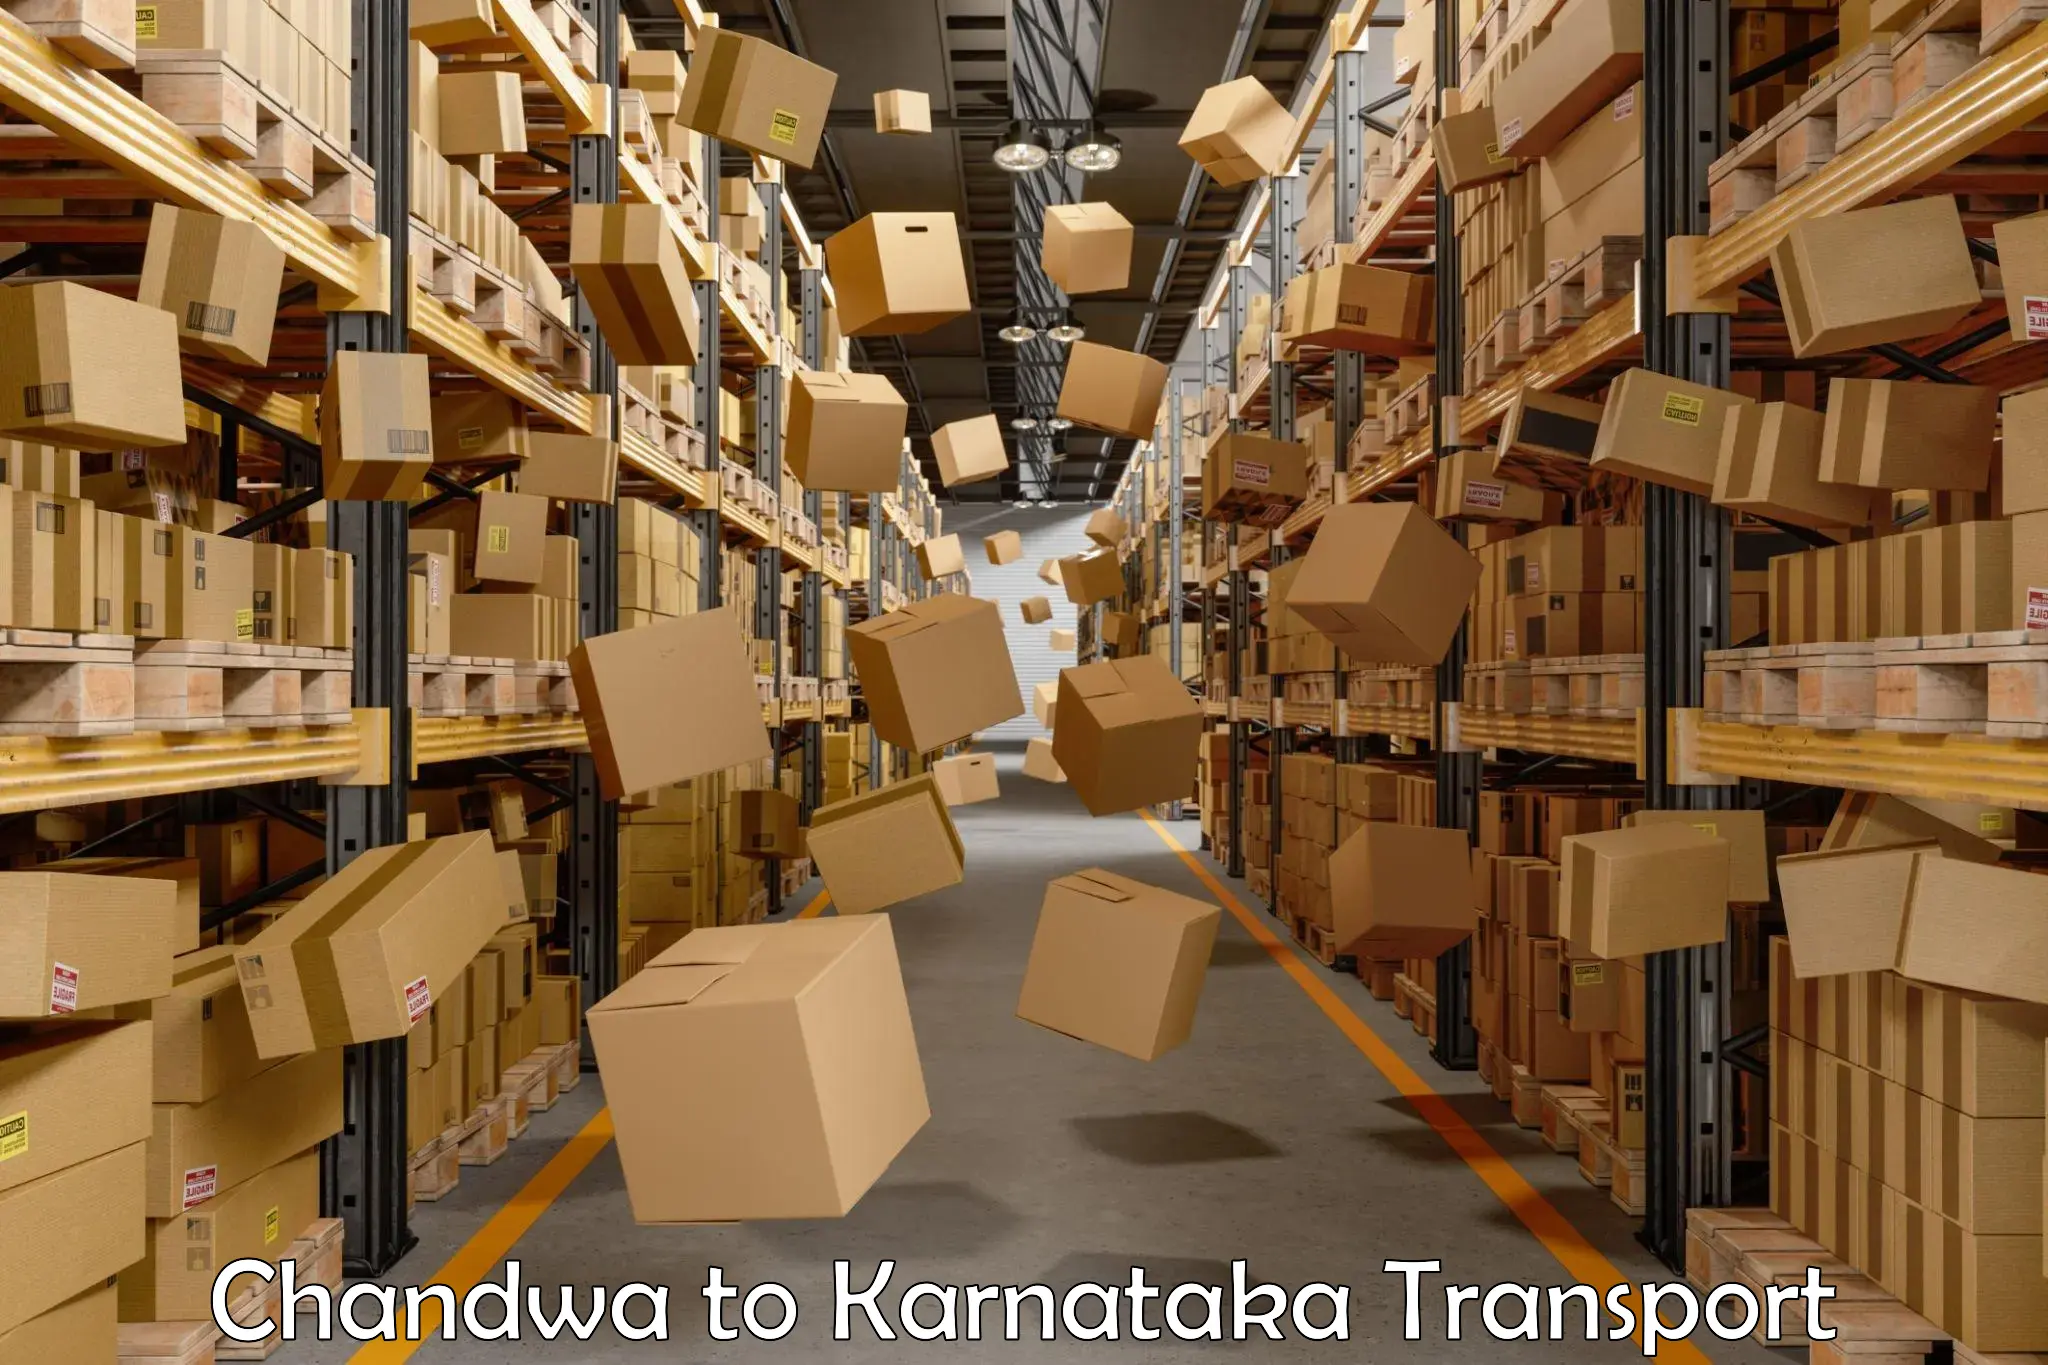 Truck transport companies in India in Chandwa to Manipal Academy of Higher Education